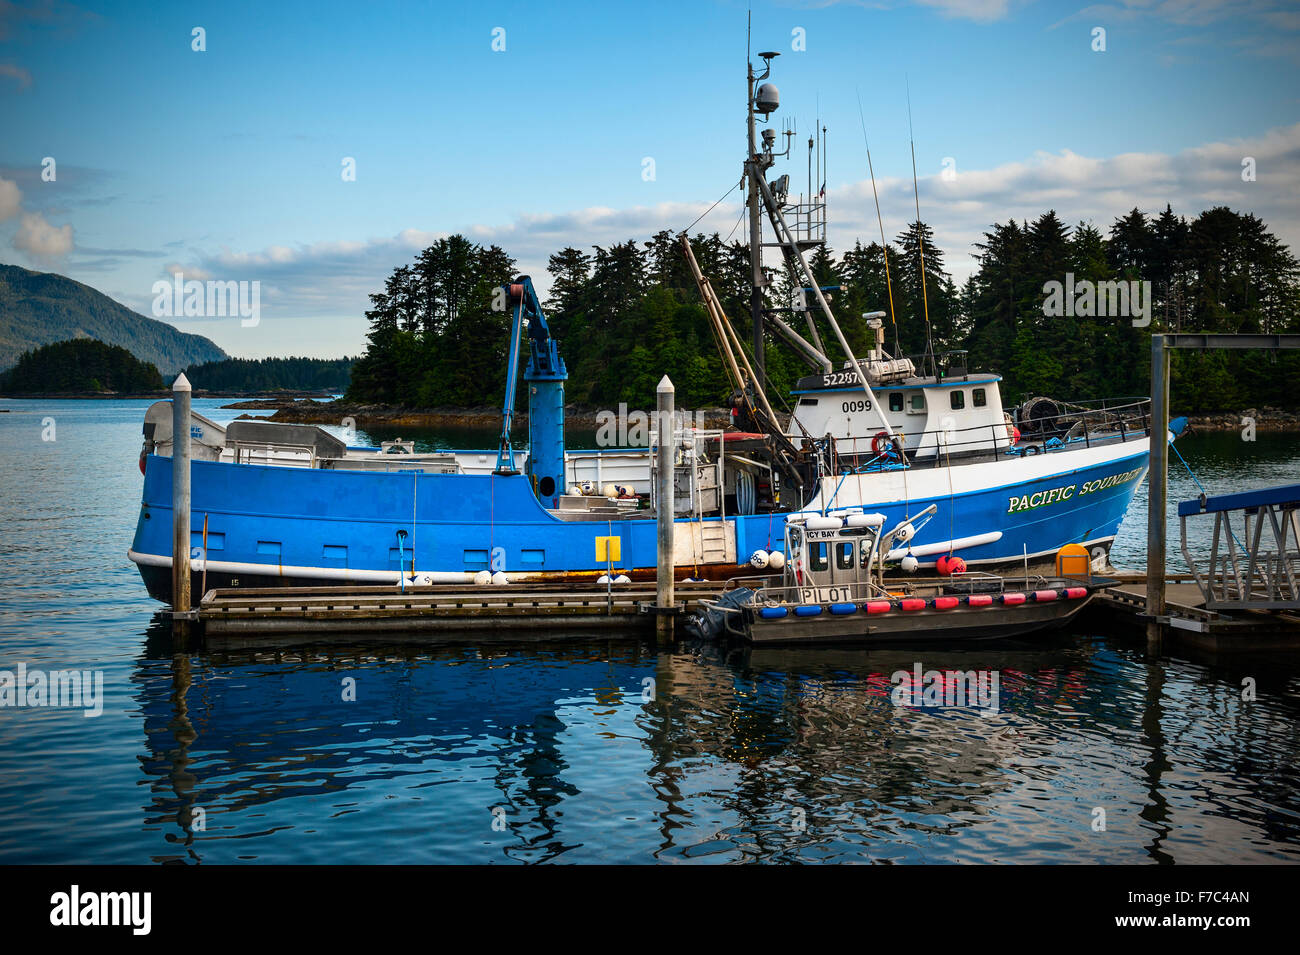 The commercial fishing vessel, the Pacific Soiunder, docked at the O'Connel Bridge litering dock in Sitka, Alaska, USA  Photogra Stock Photo